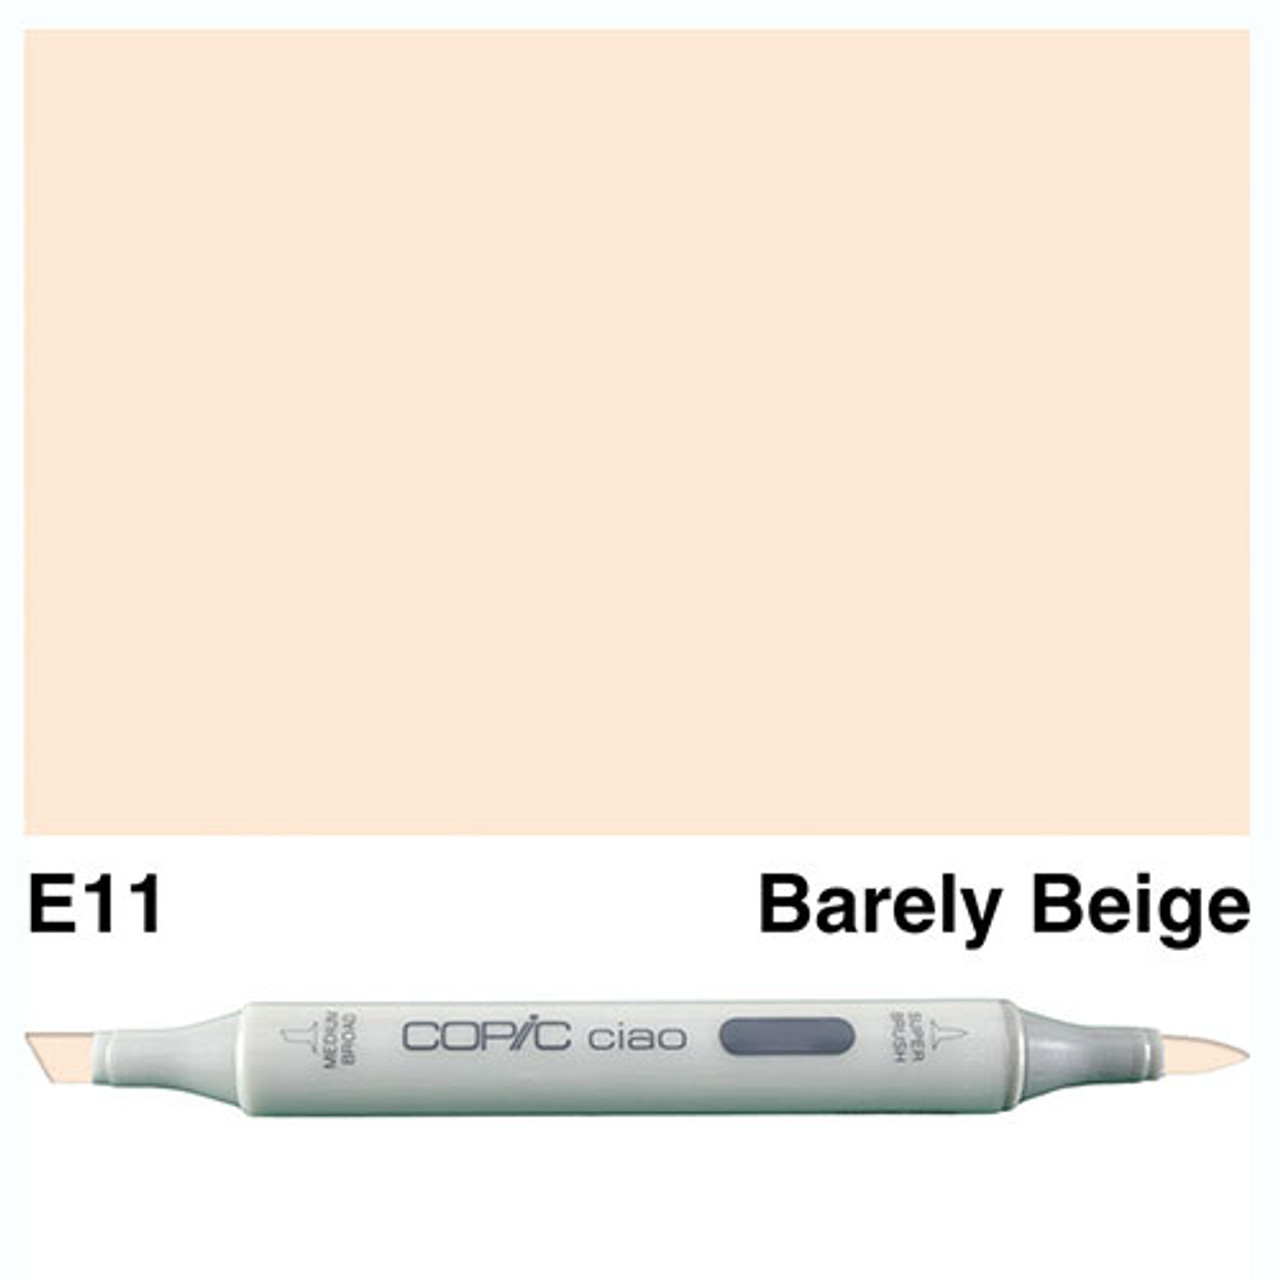 Barely Beige